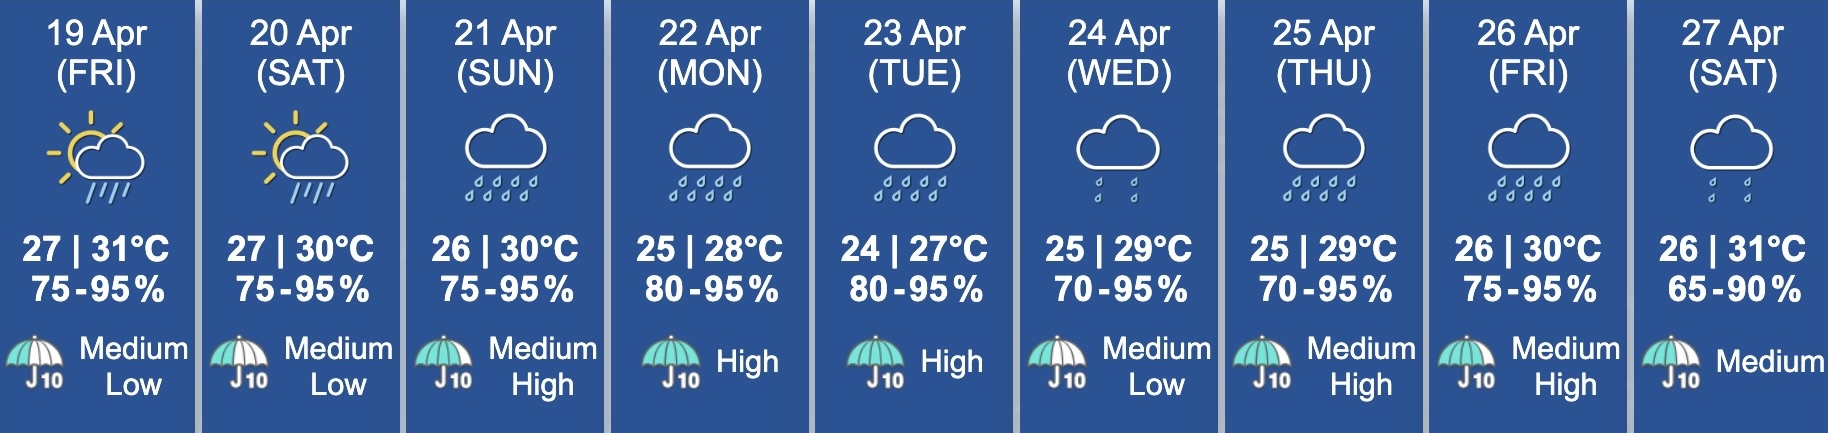 hong kong weather forecast from april 19-27 2024